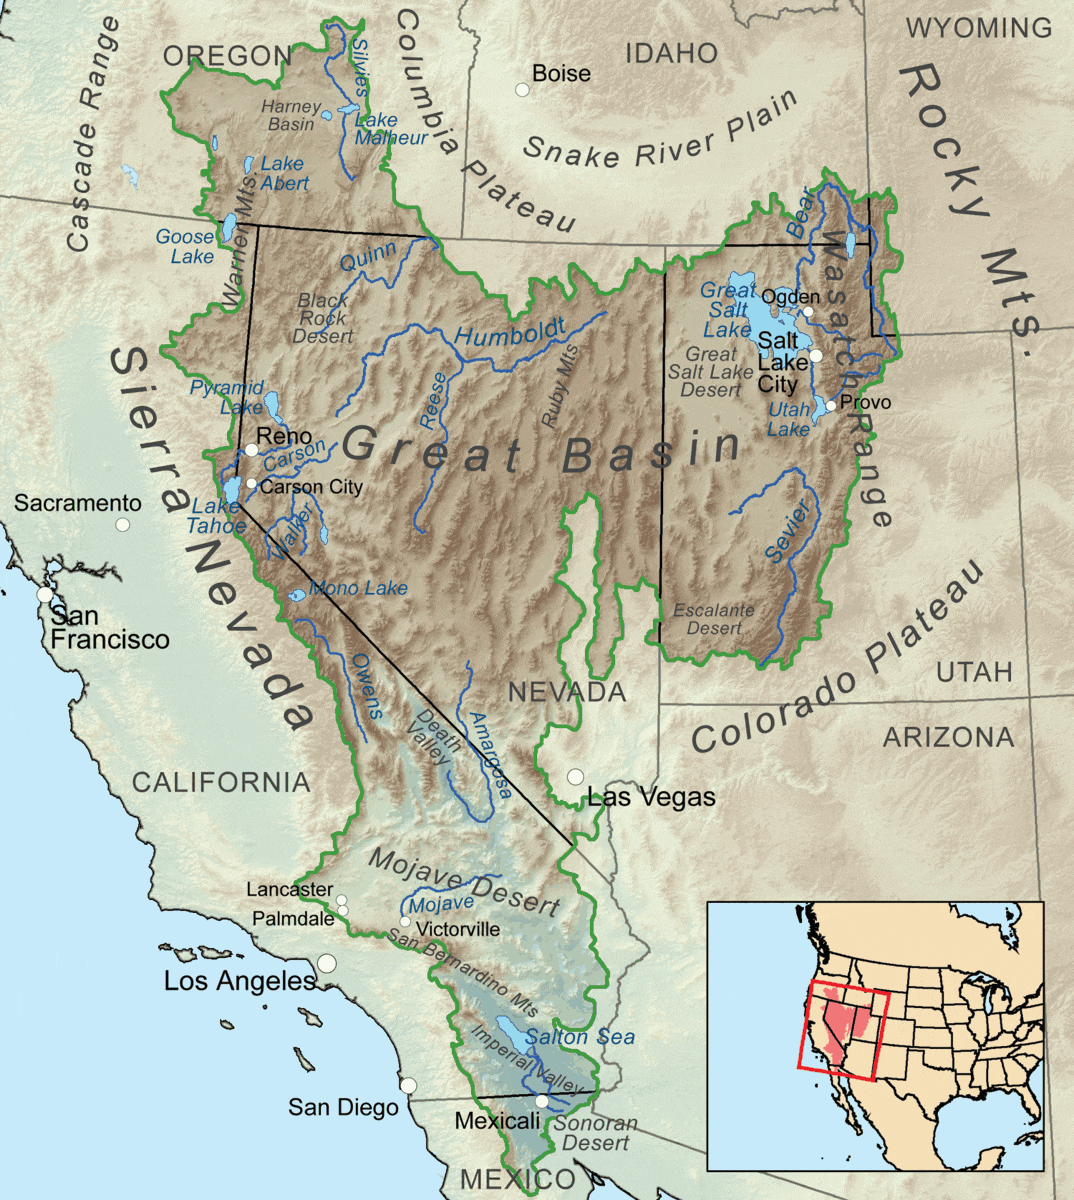 Hydrological map of the Great Basin